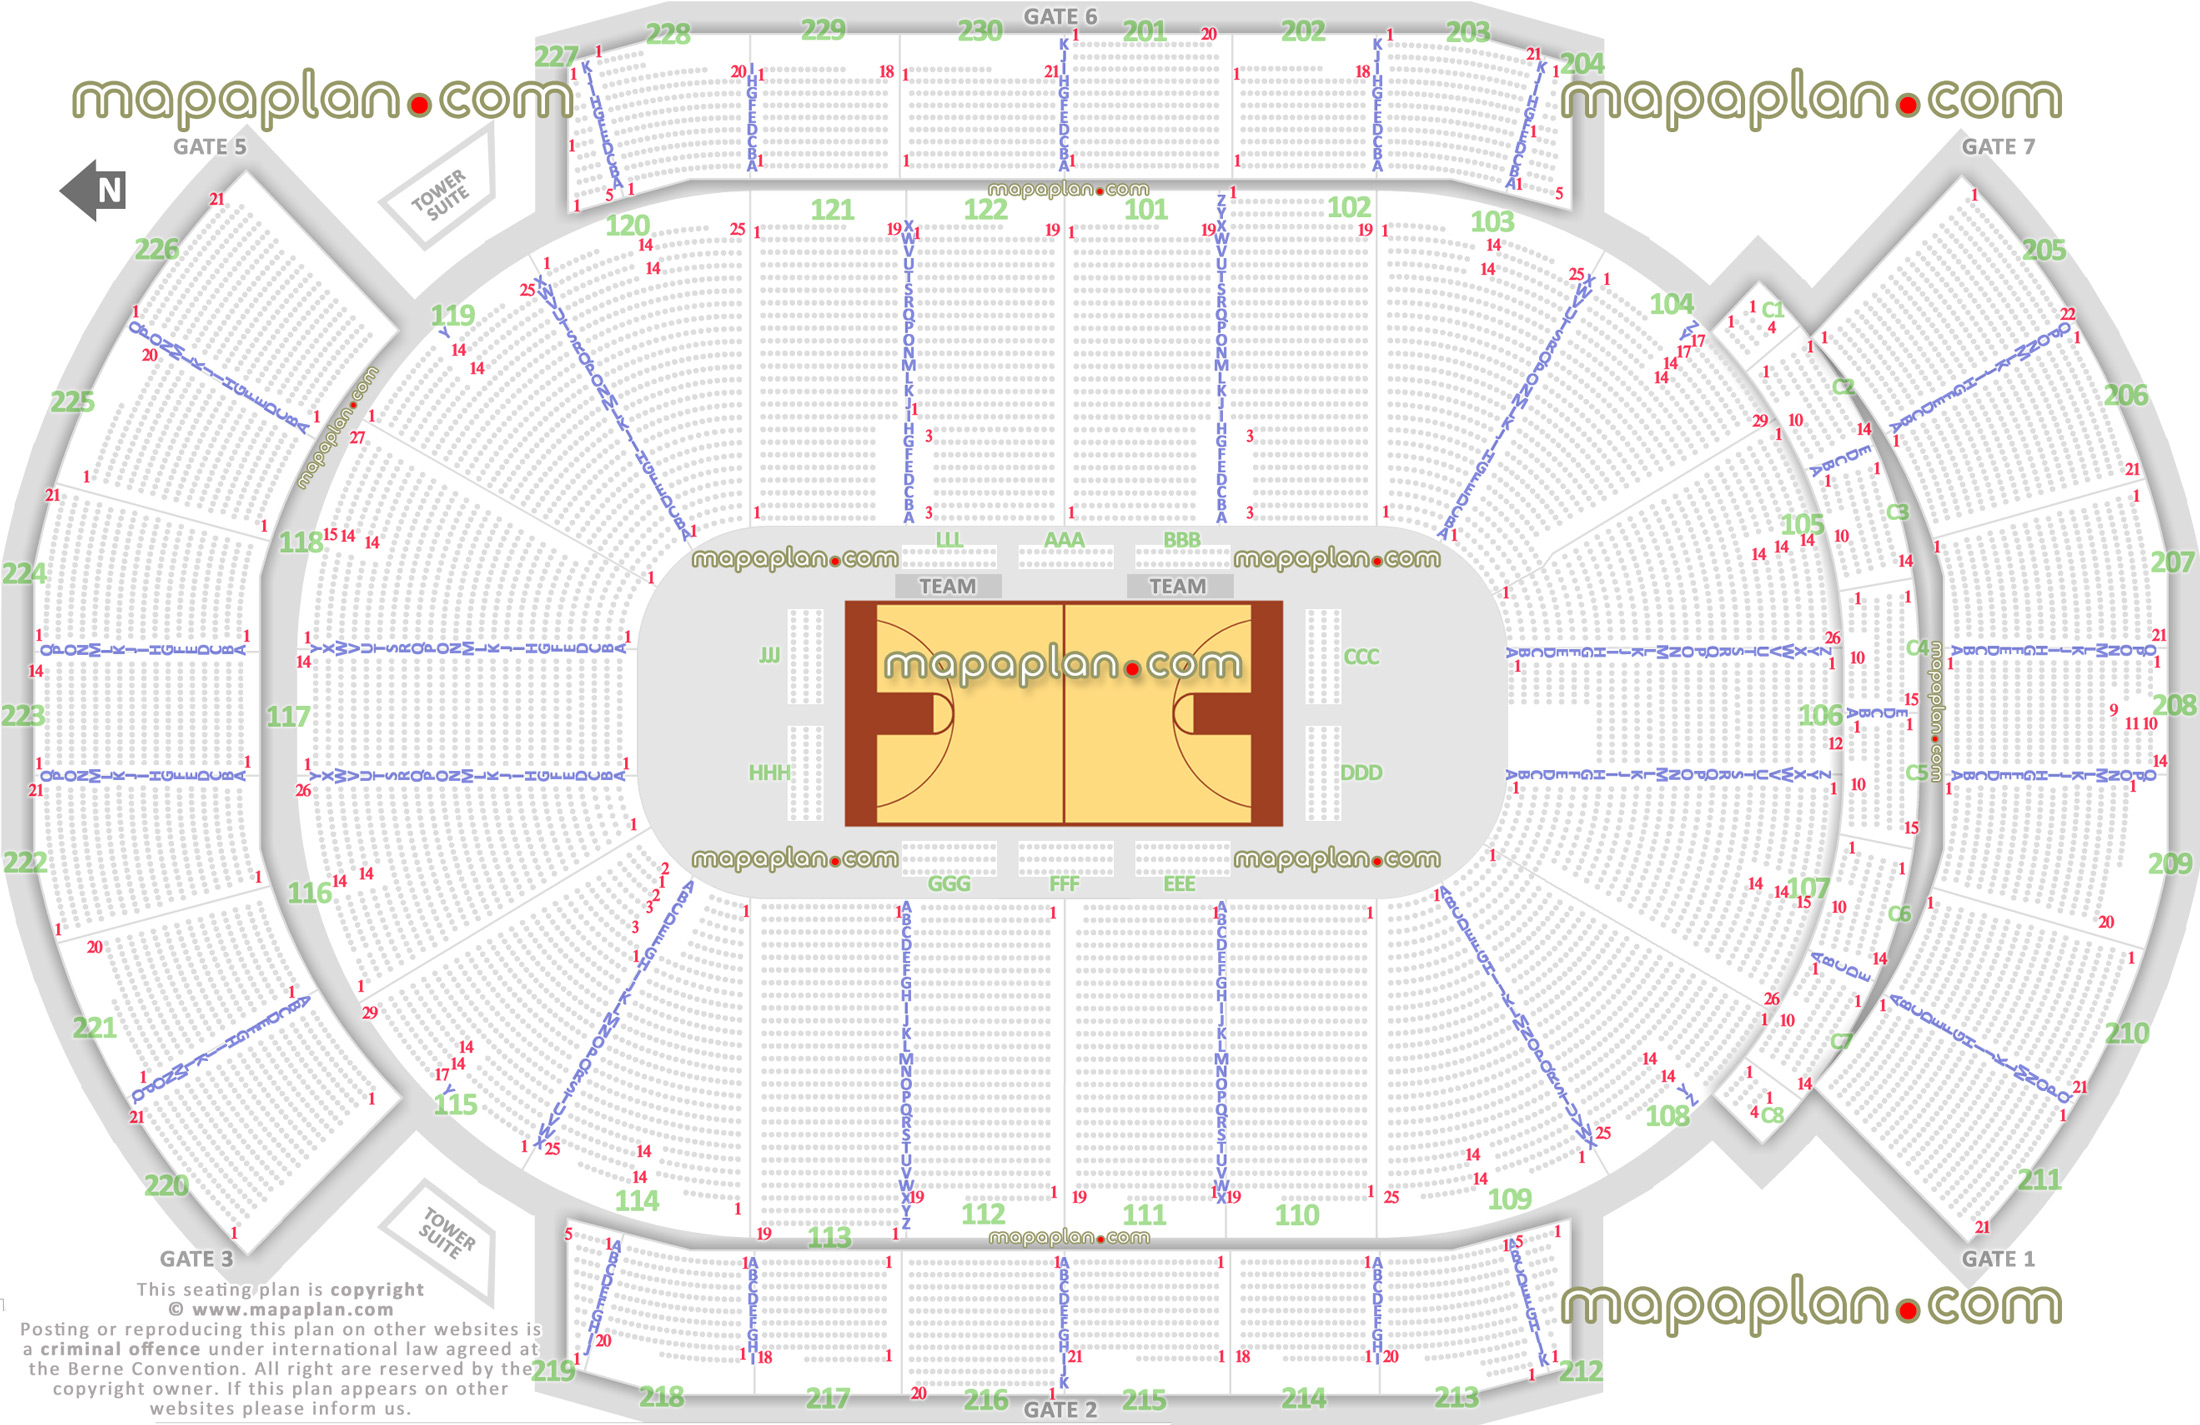 basketball games seating capacity arrangement diagram glendale arena interactive virtual 3d detailed layout glass rinkside center straights sides seats corner ends full exact row numbers plan seats row lower club upper level stadium bowl sections Glendale Gila River Arena seating chart